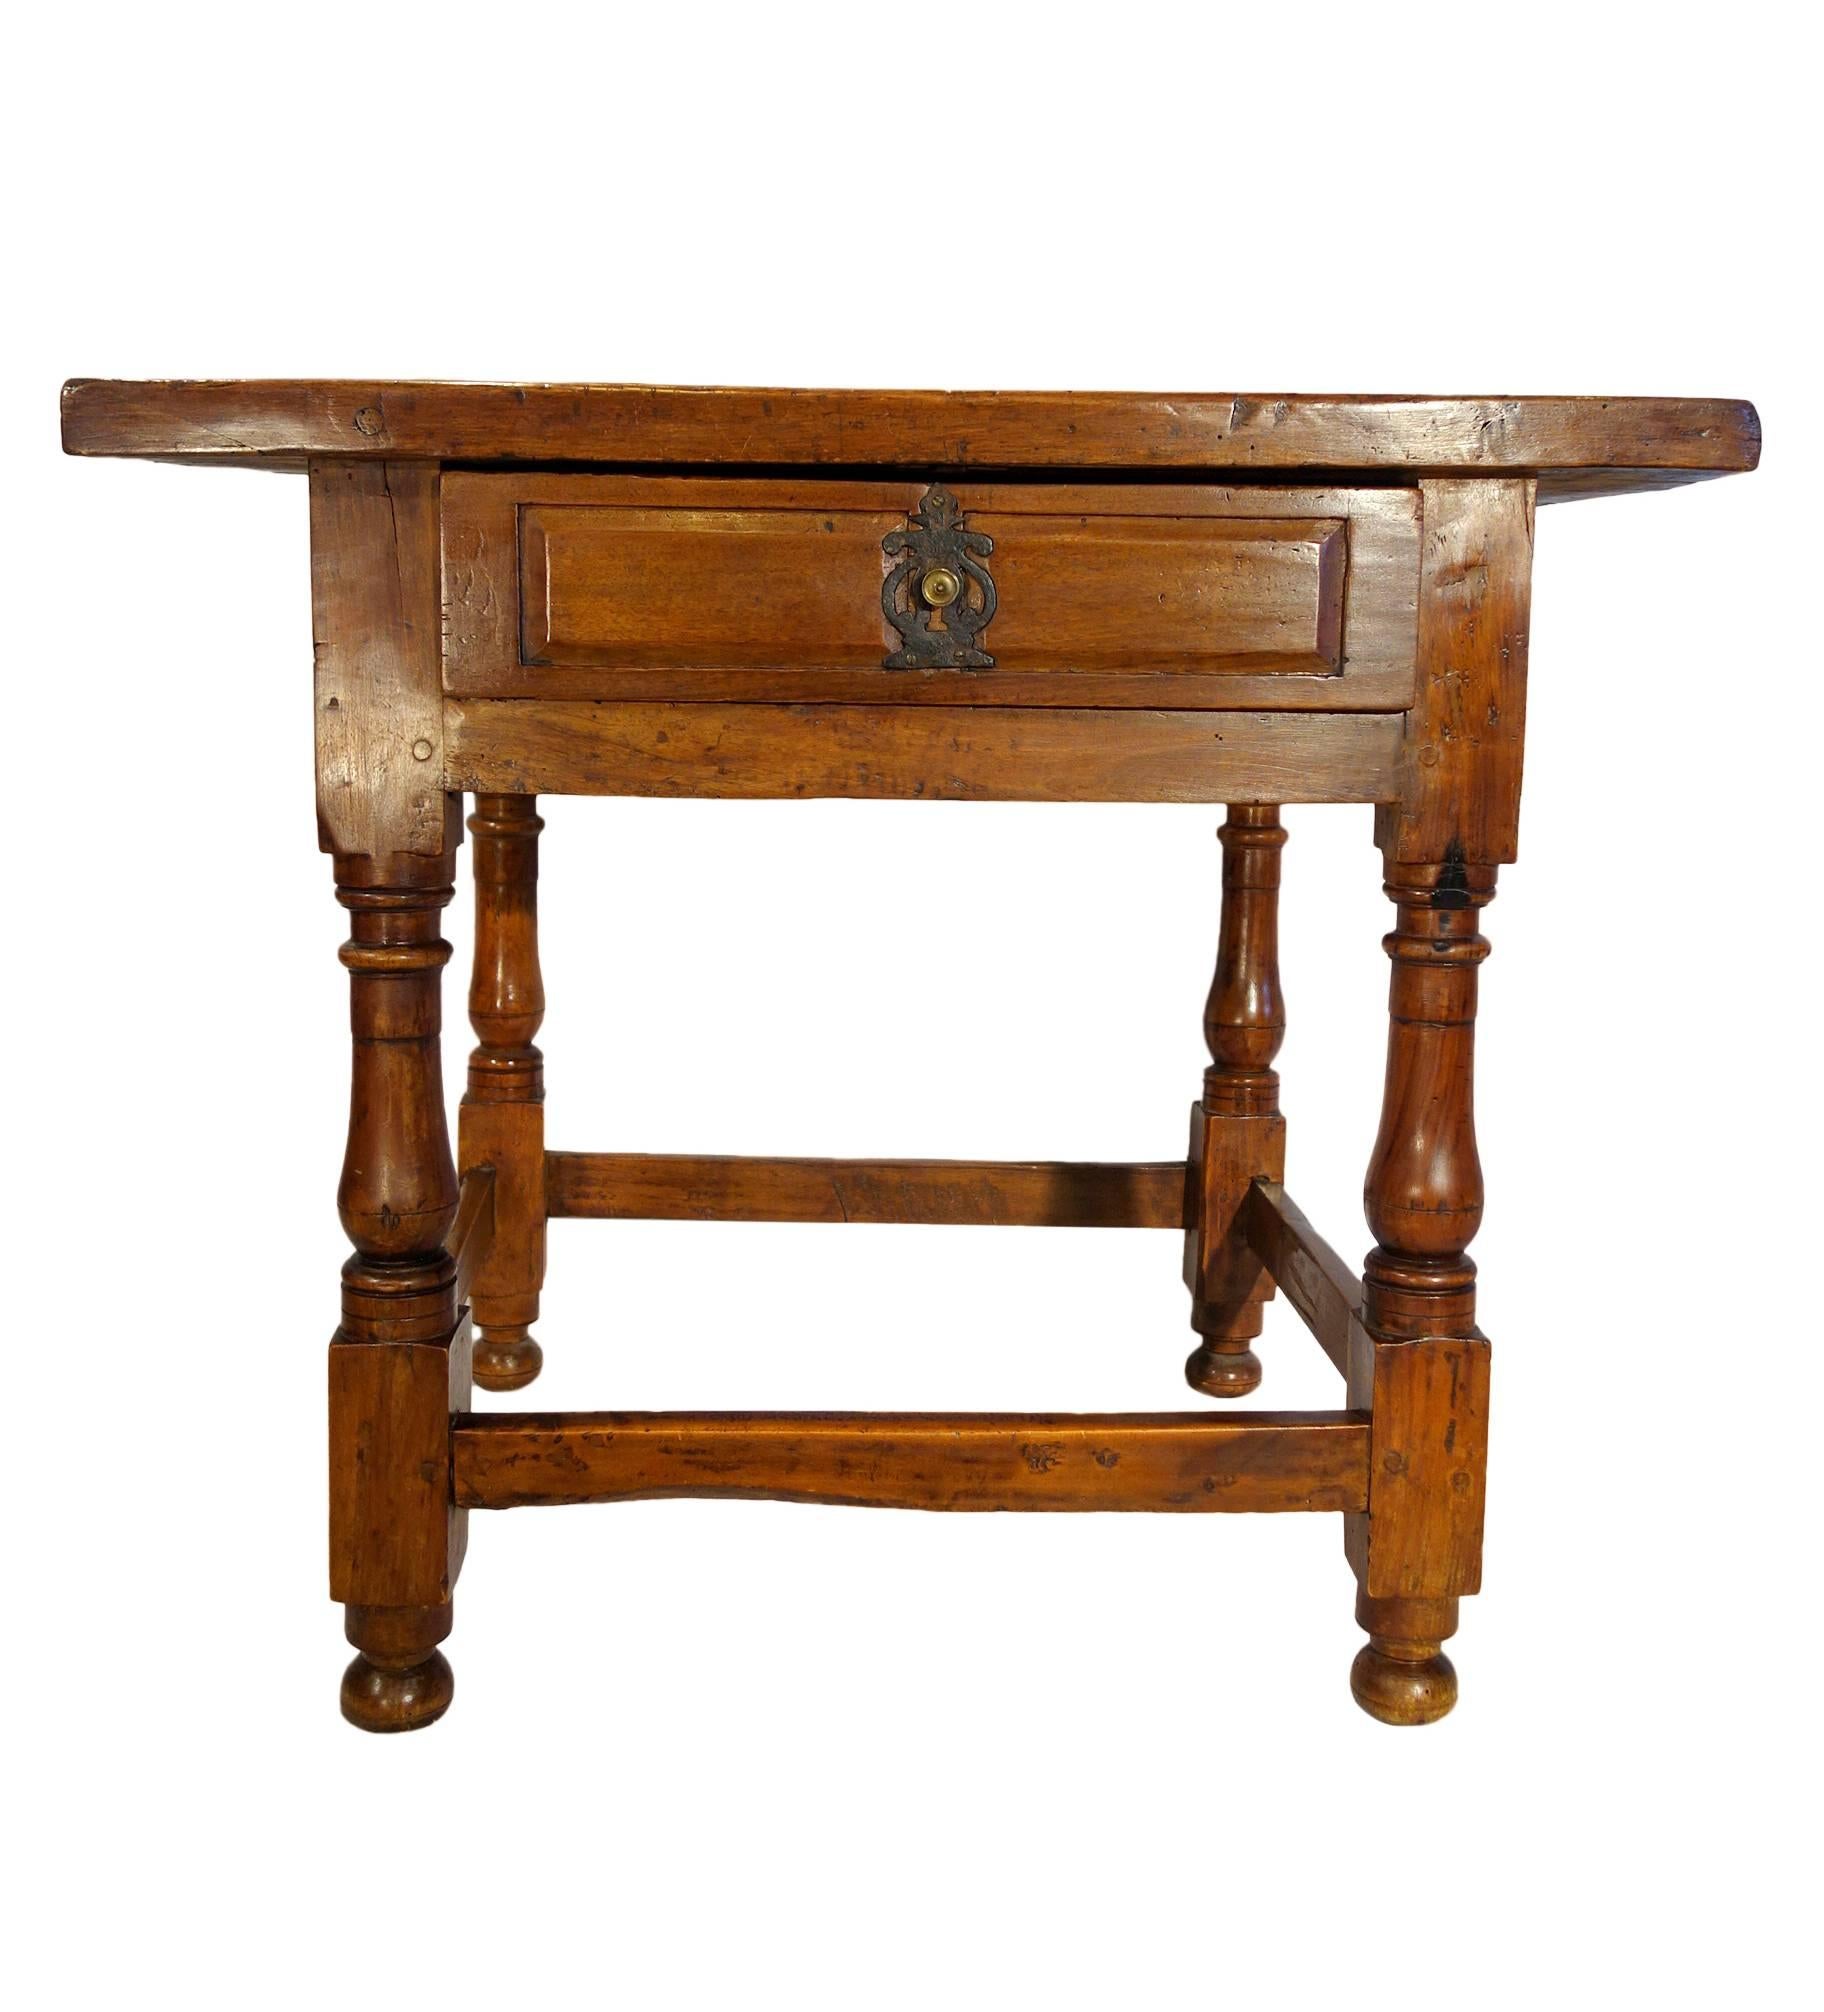 Handsome and rustic, 17th Century Tuscan style, solid walnut occasional table with one center drawer and square framed base with crafted legs.

Measures: 34.25